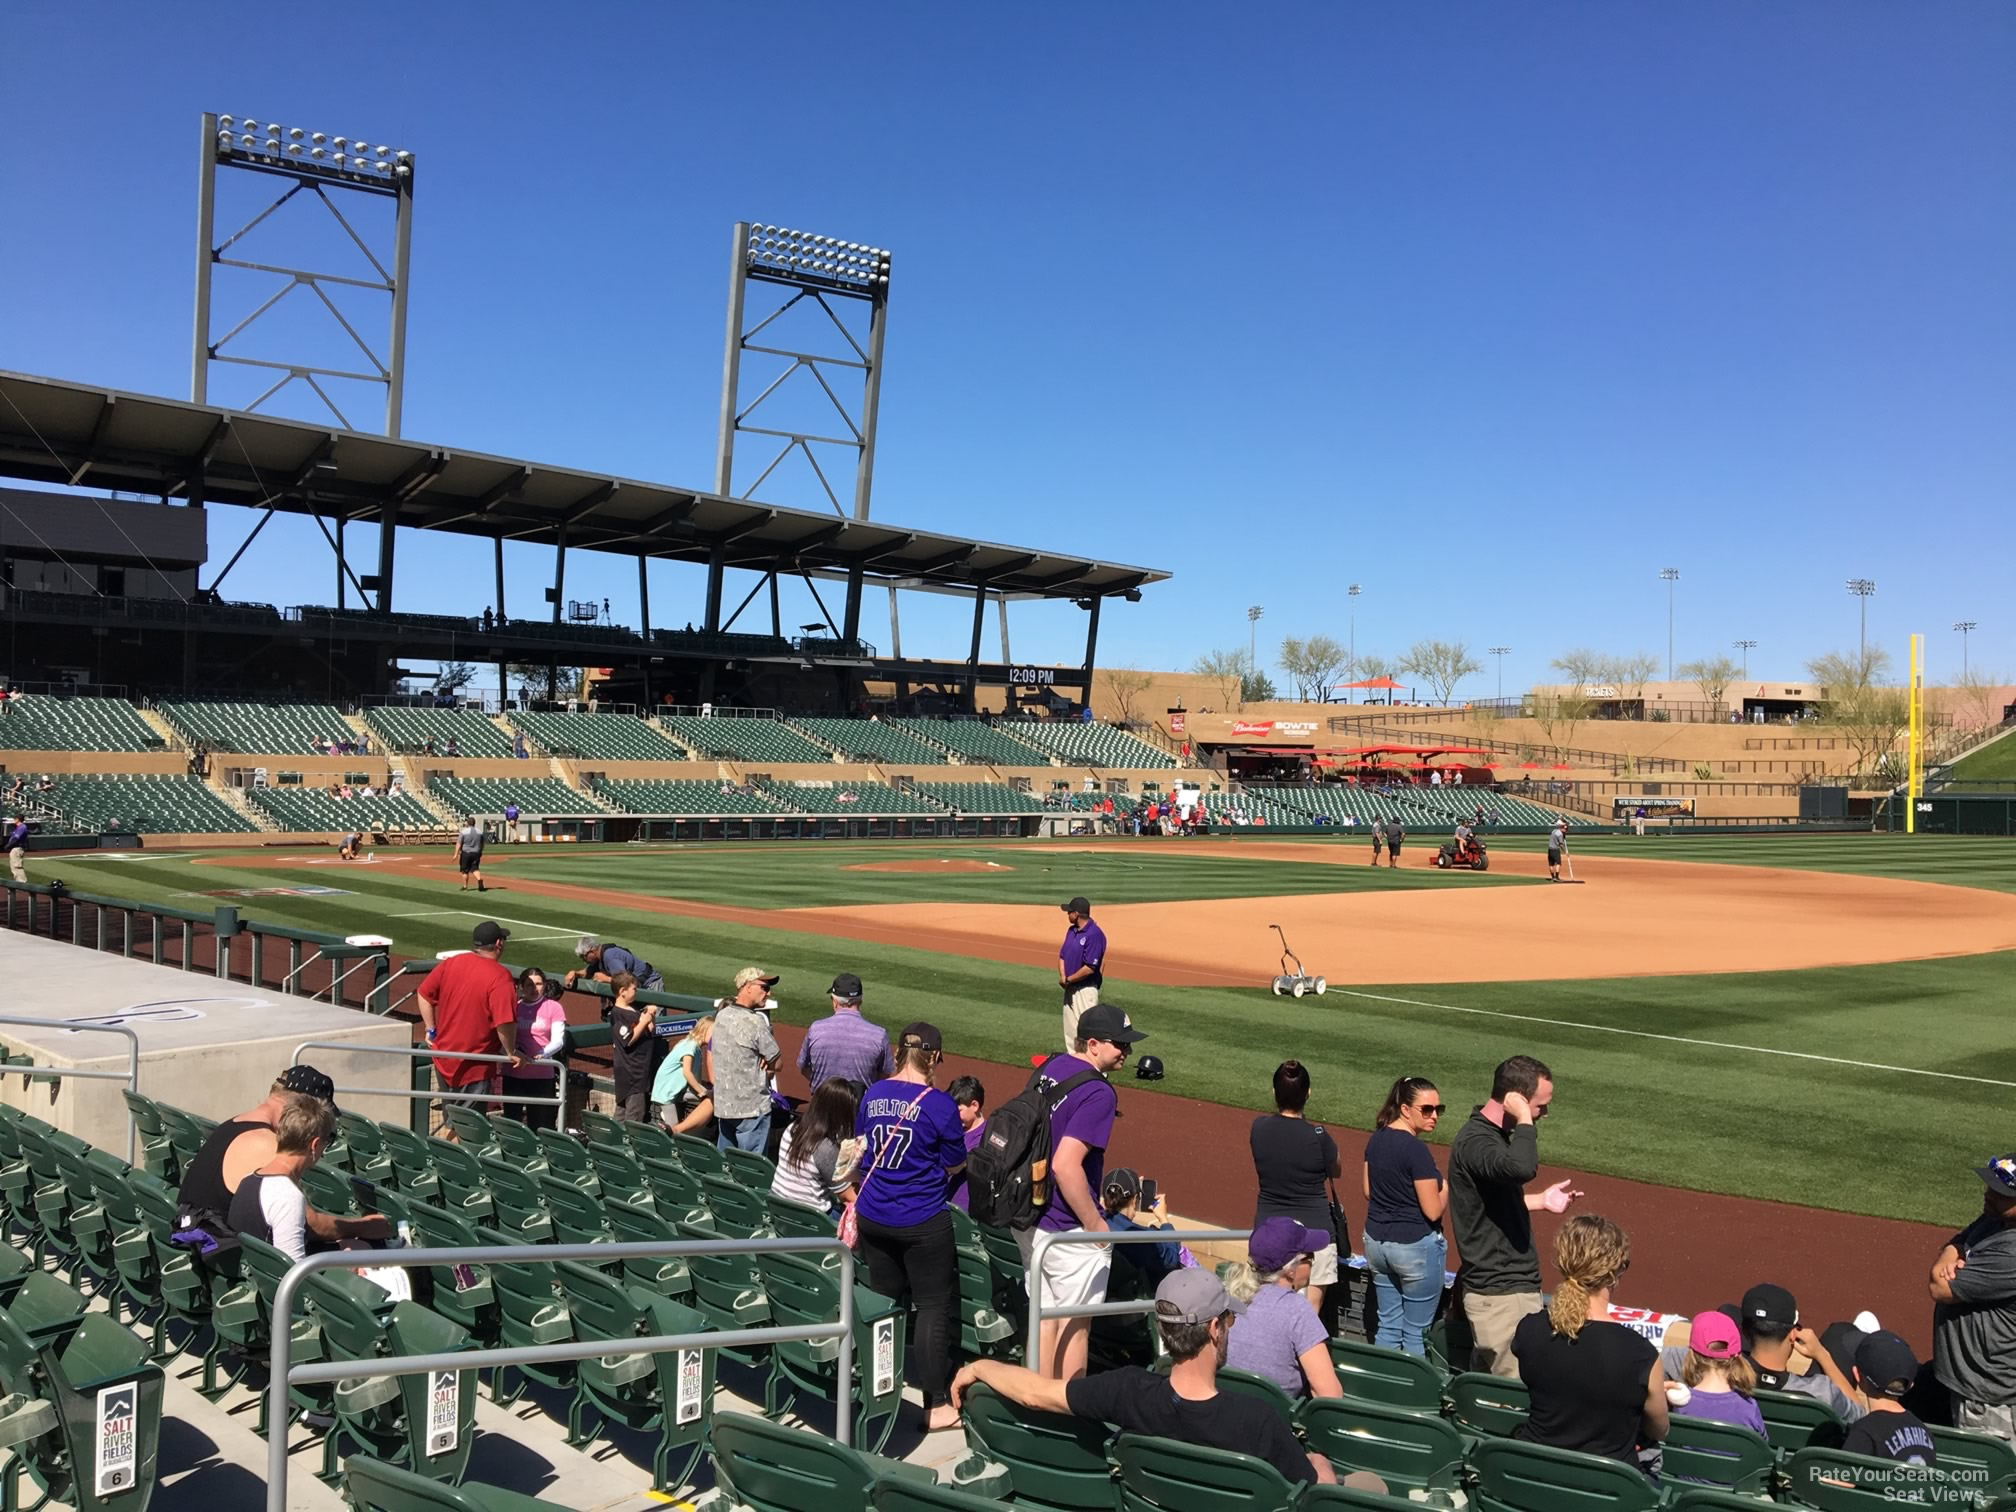 section 103, row 10 seat view  - salt river field at talking stick